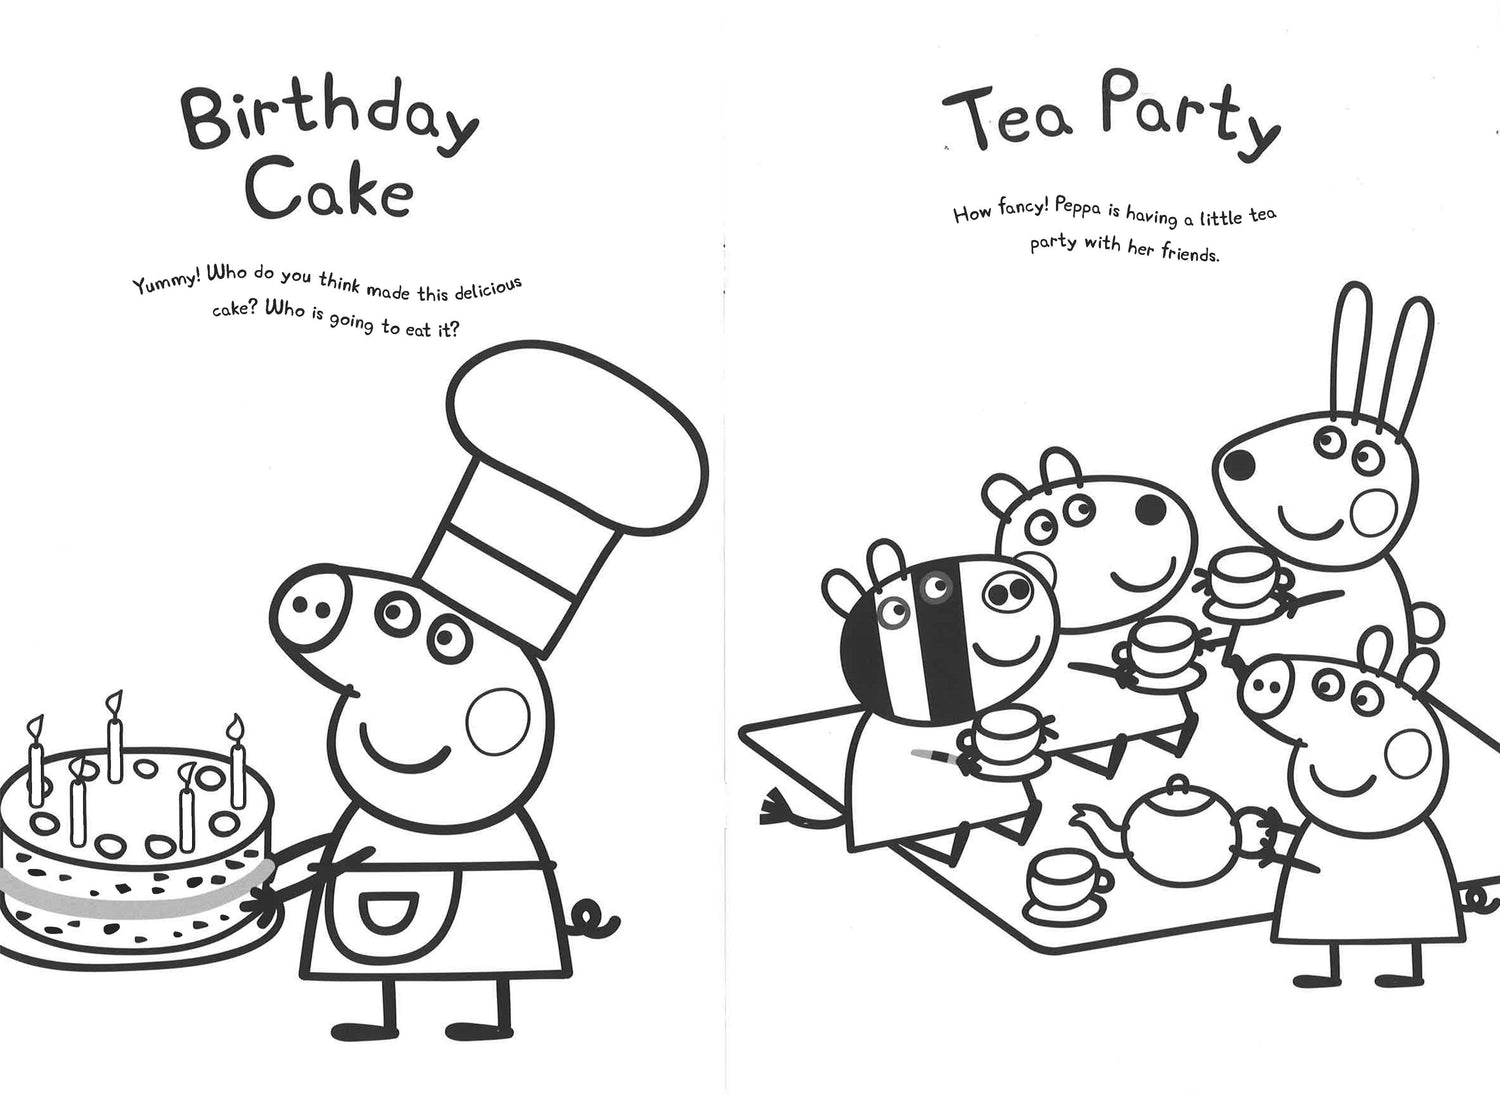 Peppa is remplaced #2  Peppa pig house, Peppa pig colouring, Peppa pig  birthday party